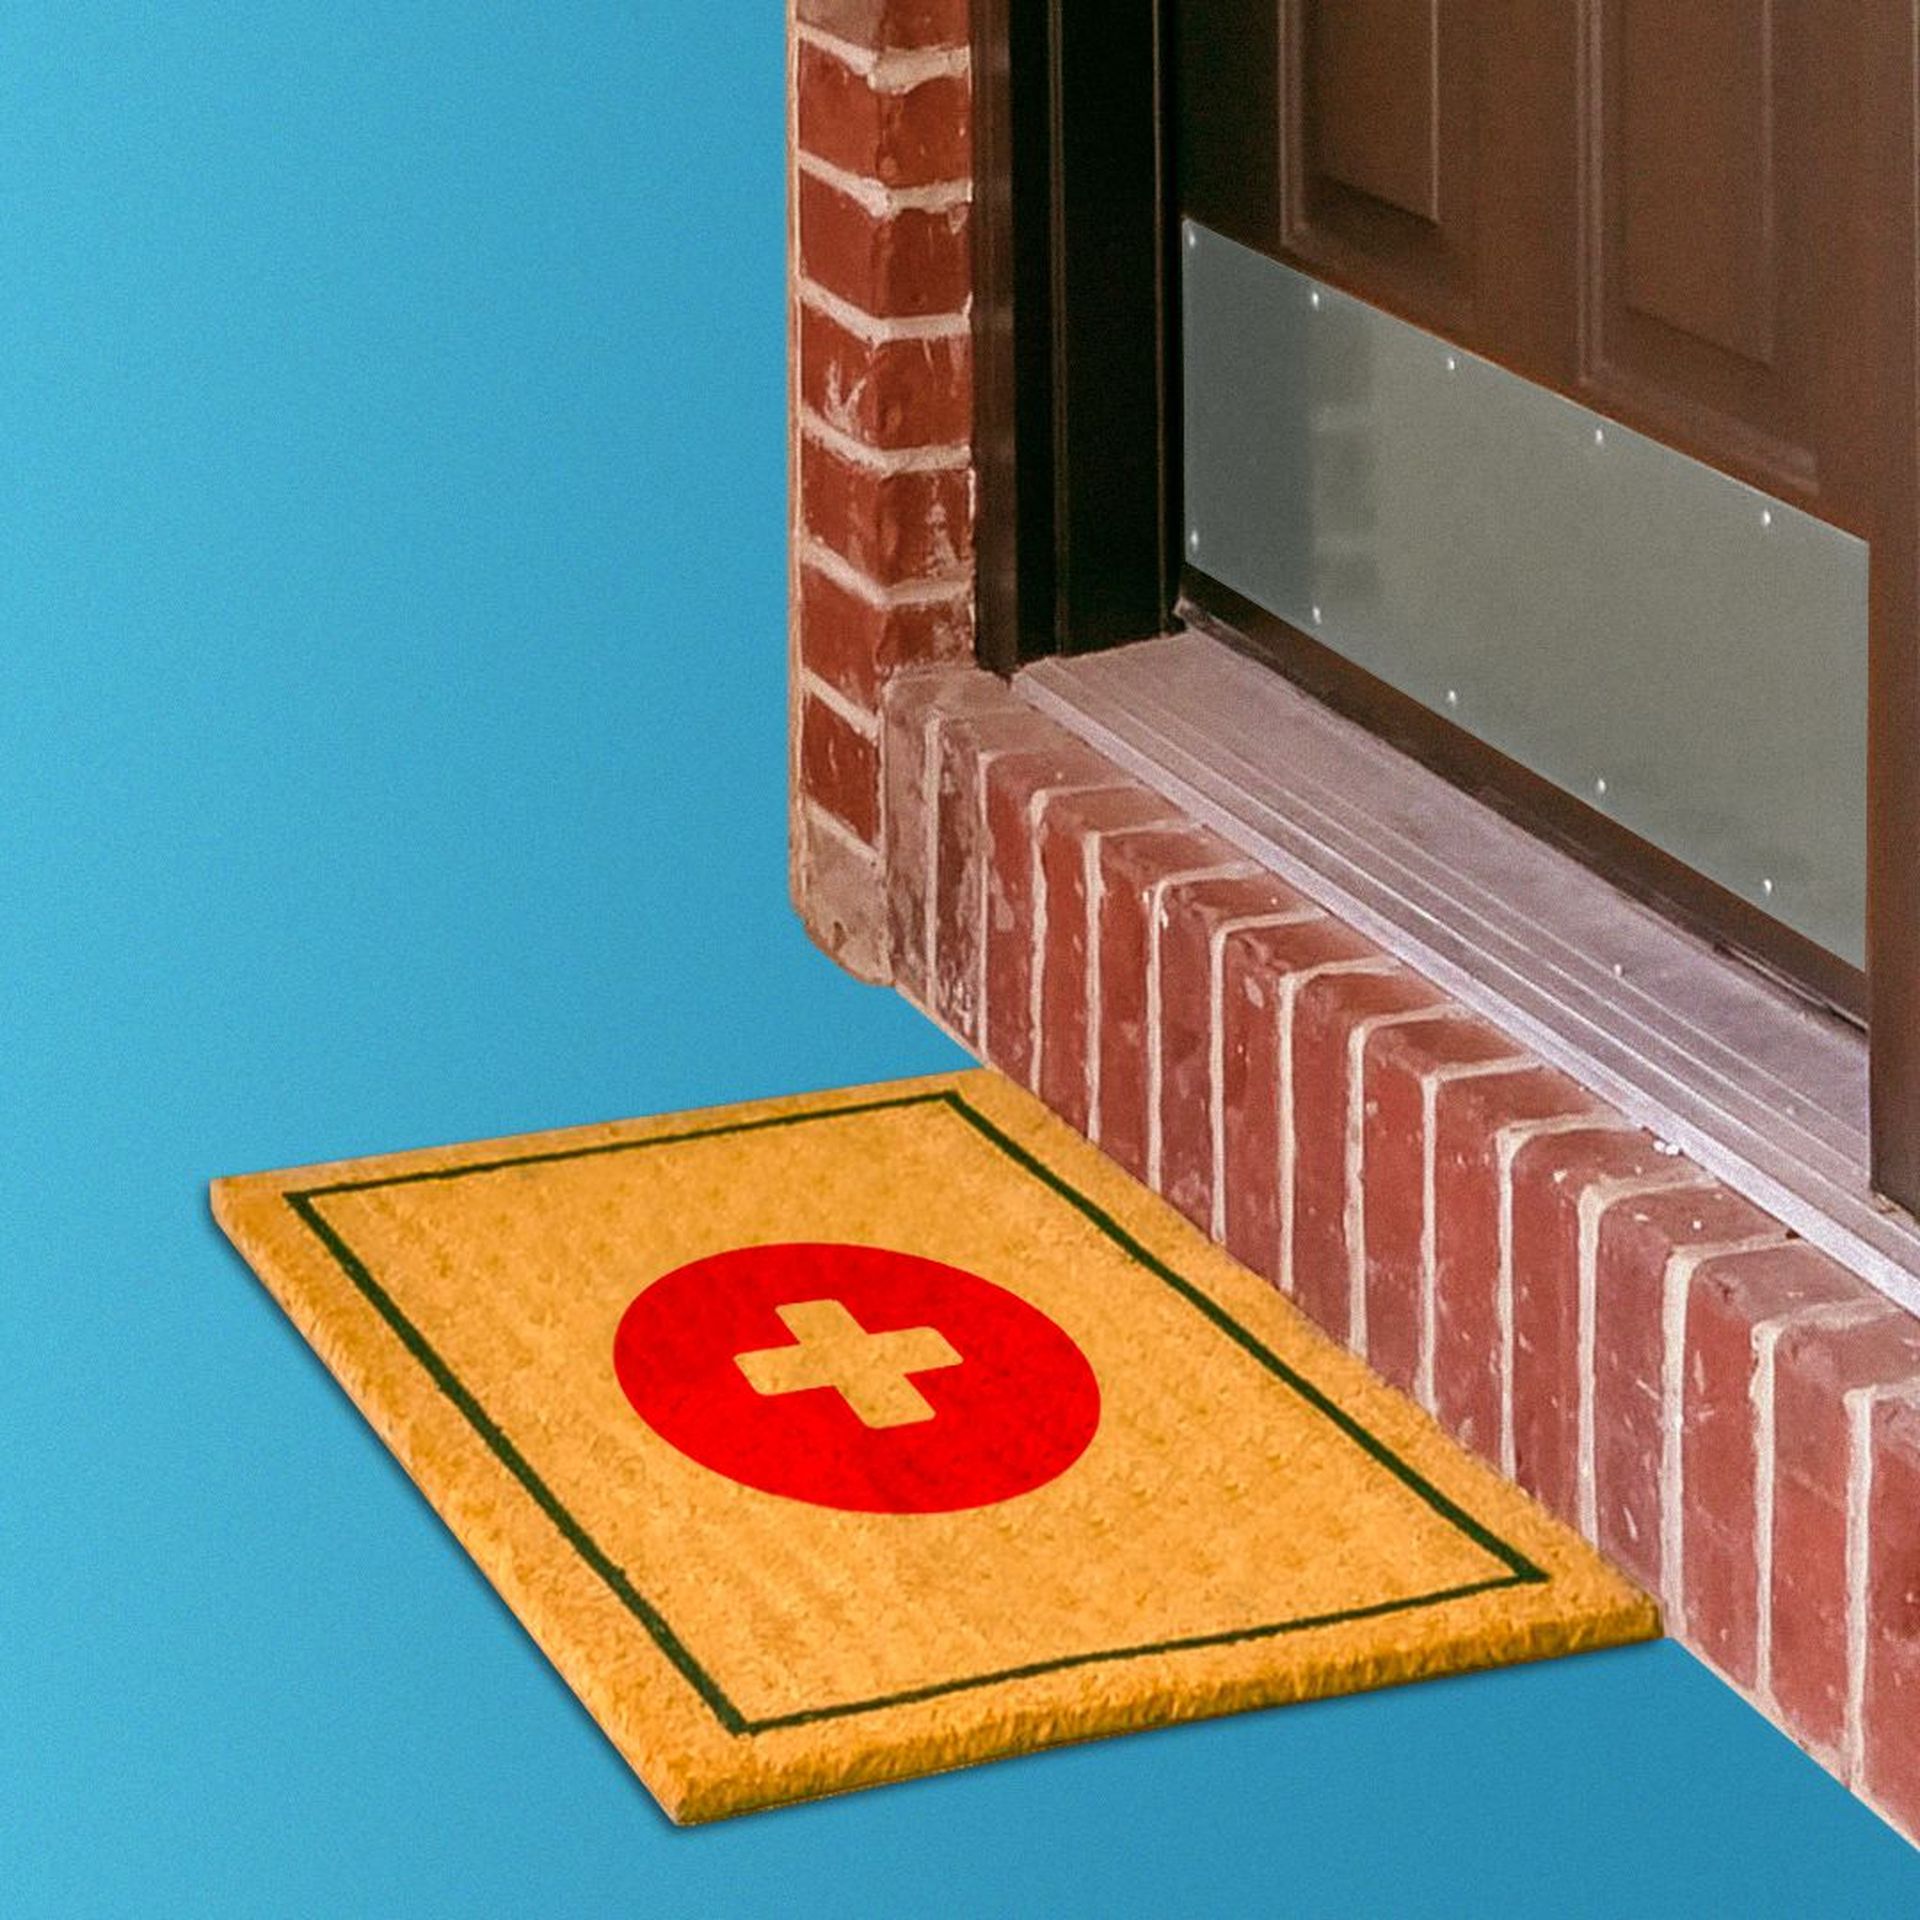 Illustration of a doormat with a red cross outside a front door.